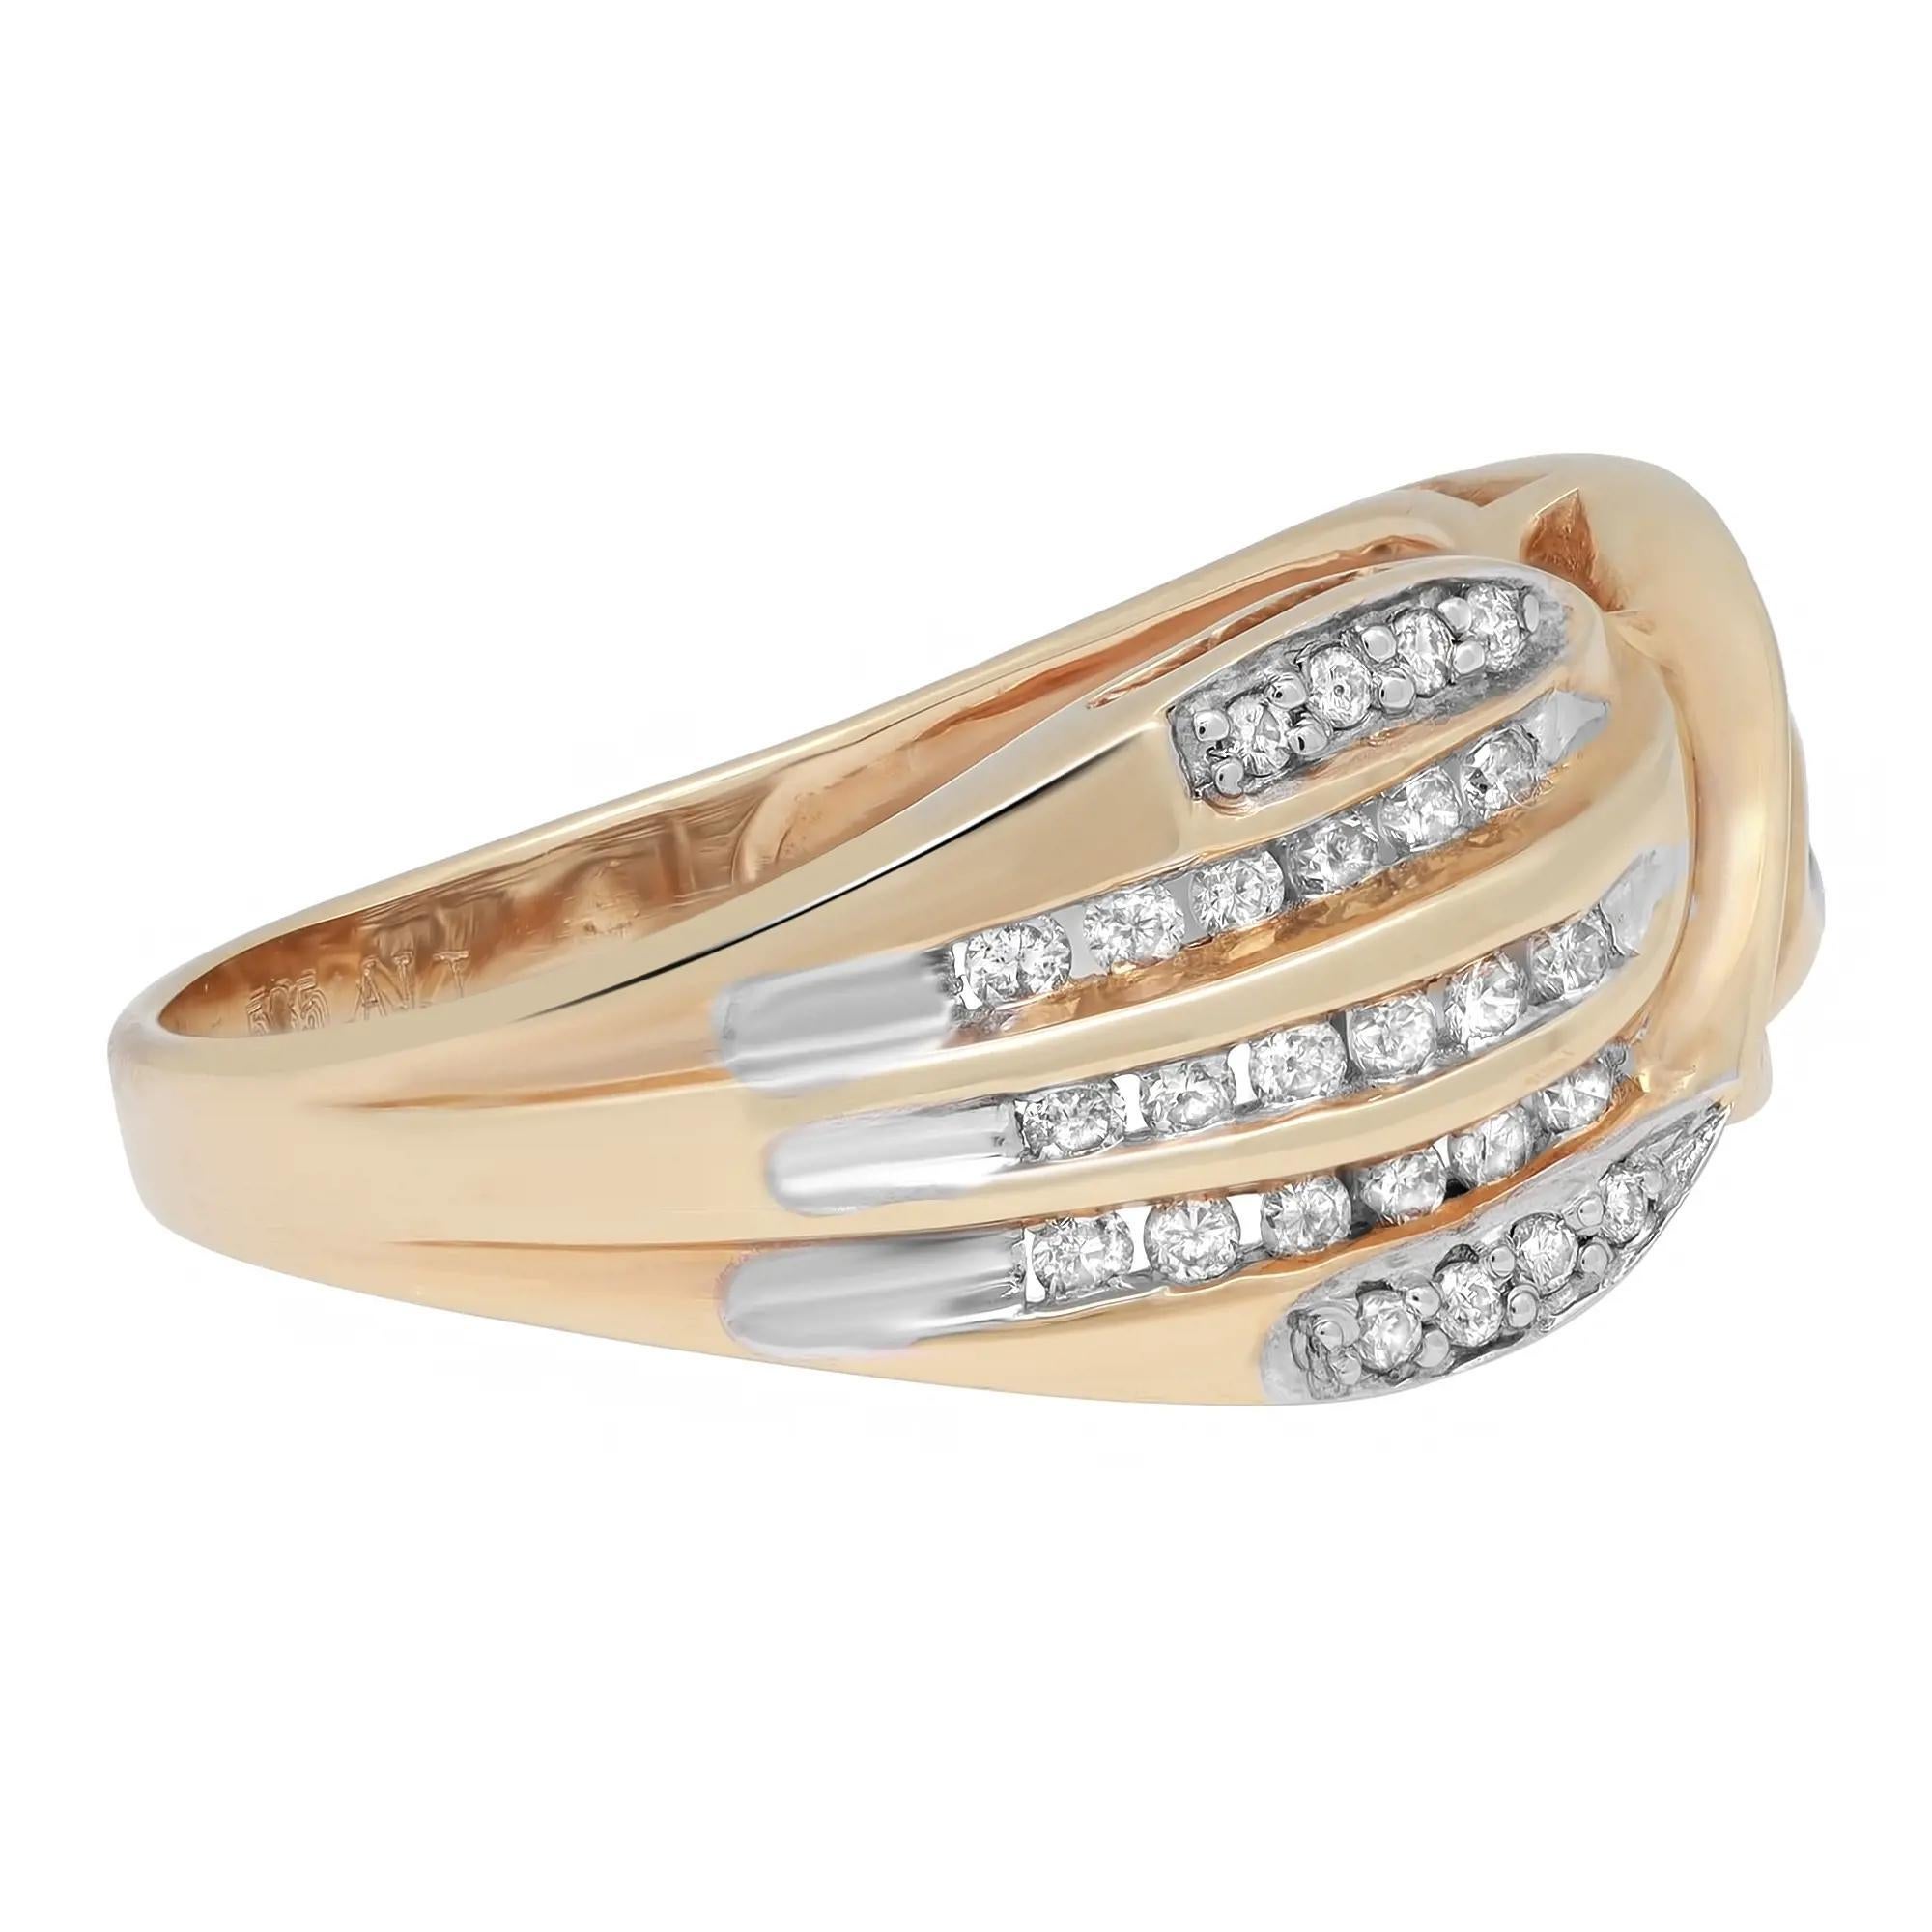 Classic and elegant diamond band ring rendered in highly polished 14K yellow gold. This ring features sparkling round brilliant cut diamonds in channel and prong settings totaling 0.39 carat. Diamond quality: I color and SI1 clarity. Ring size: